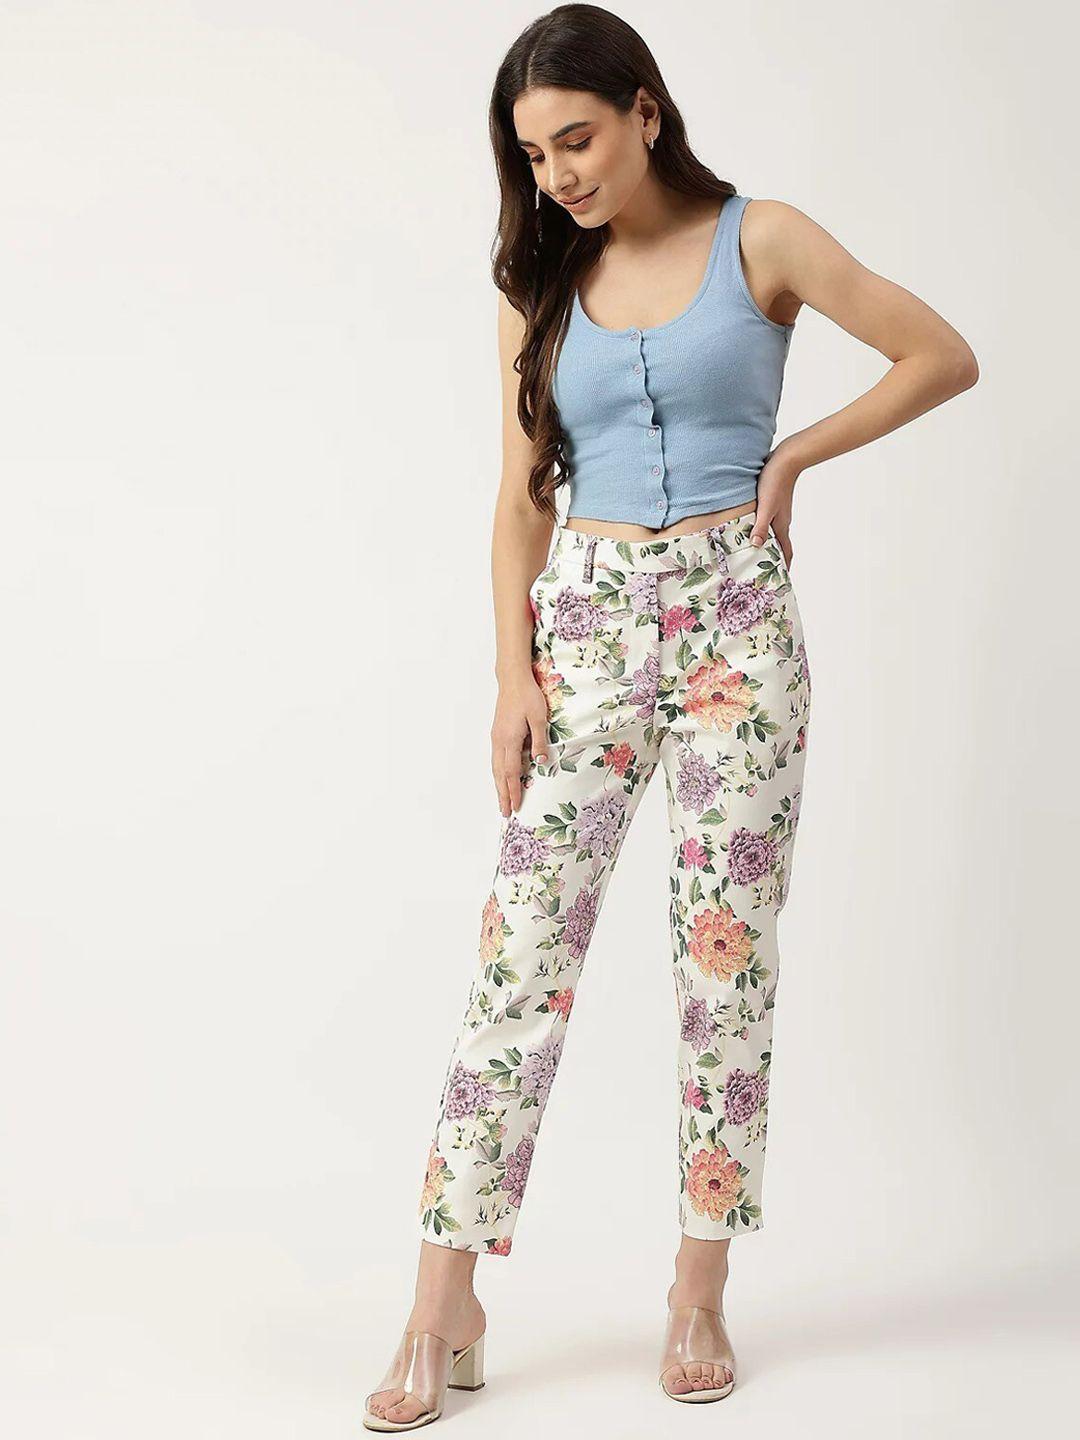 marks & spencer women cream-coloured floral printed trousers